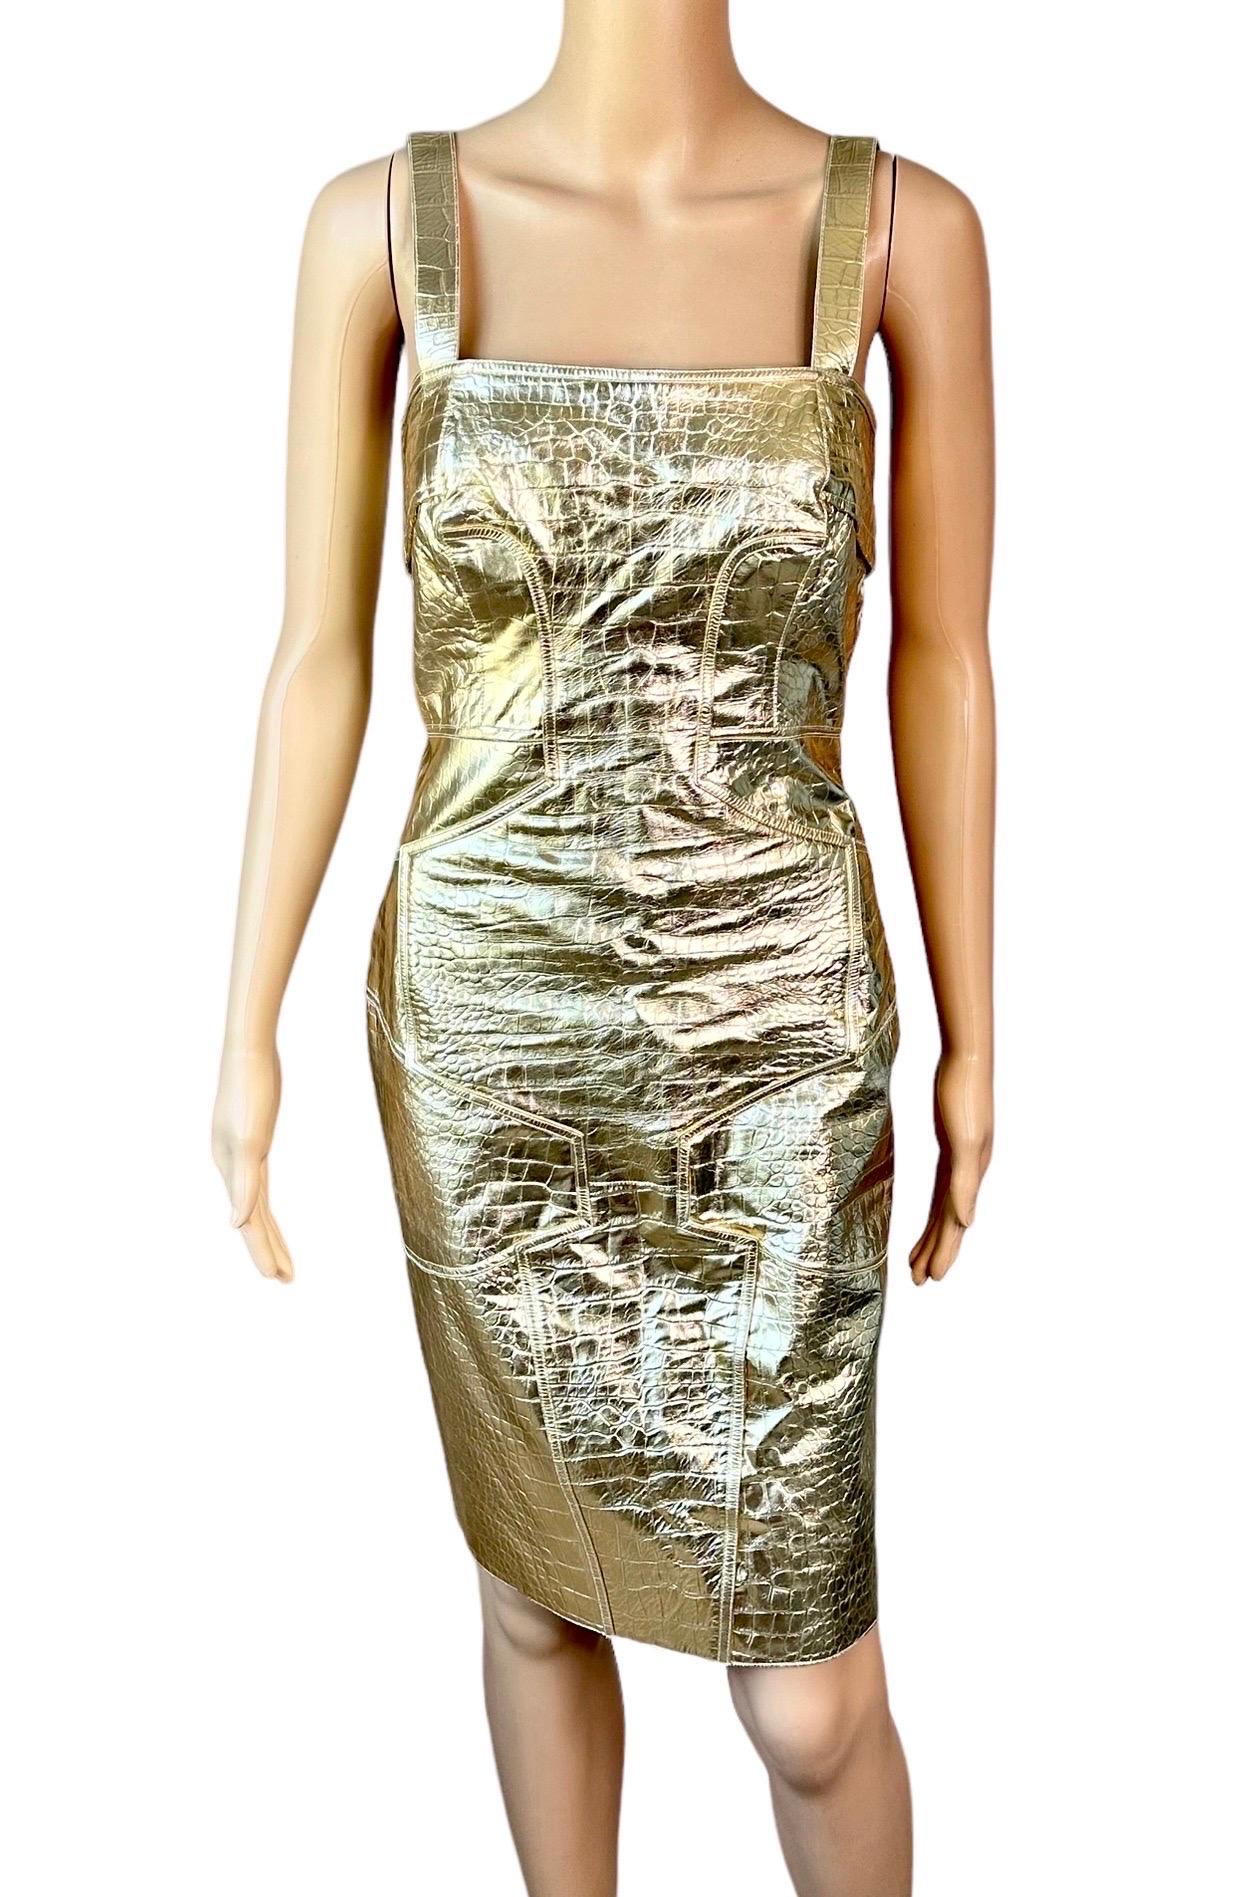 Versace S/S 2009 Runway Metallic Gold Leather Campaign Dress IT 40

Look 7 from the Sprint 2009 Runway and the Versace S/S 2009 Campaign. 